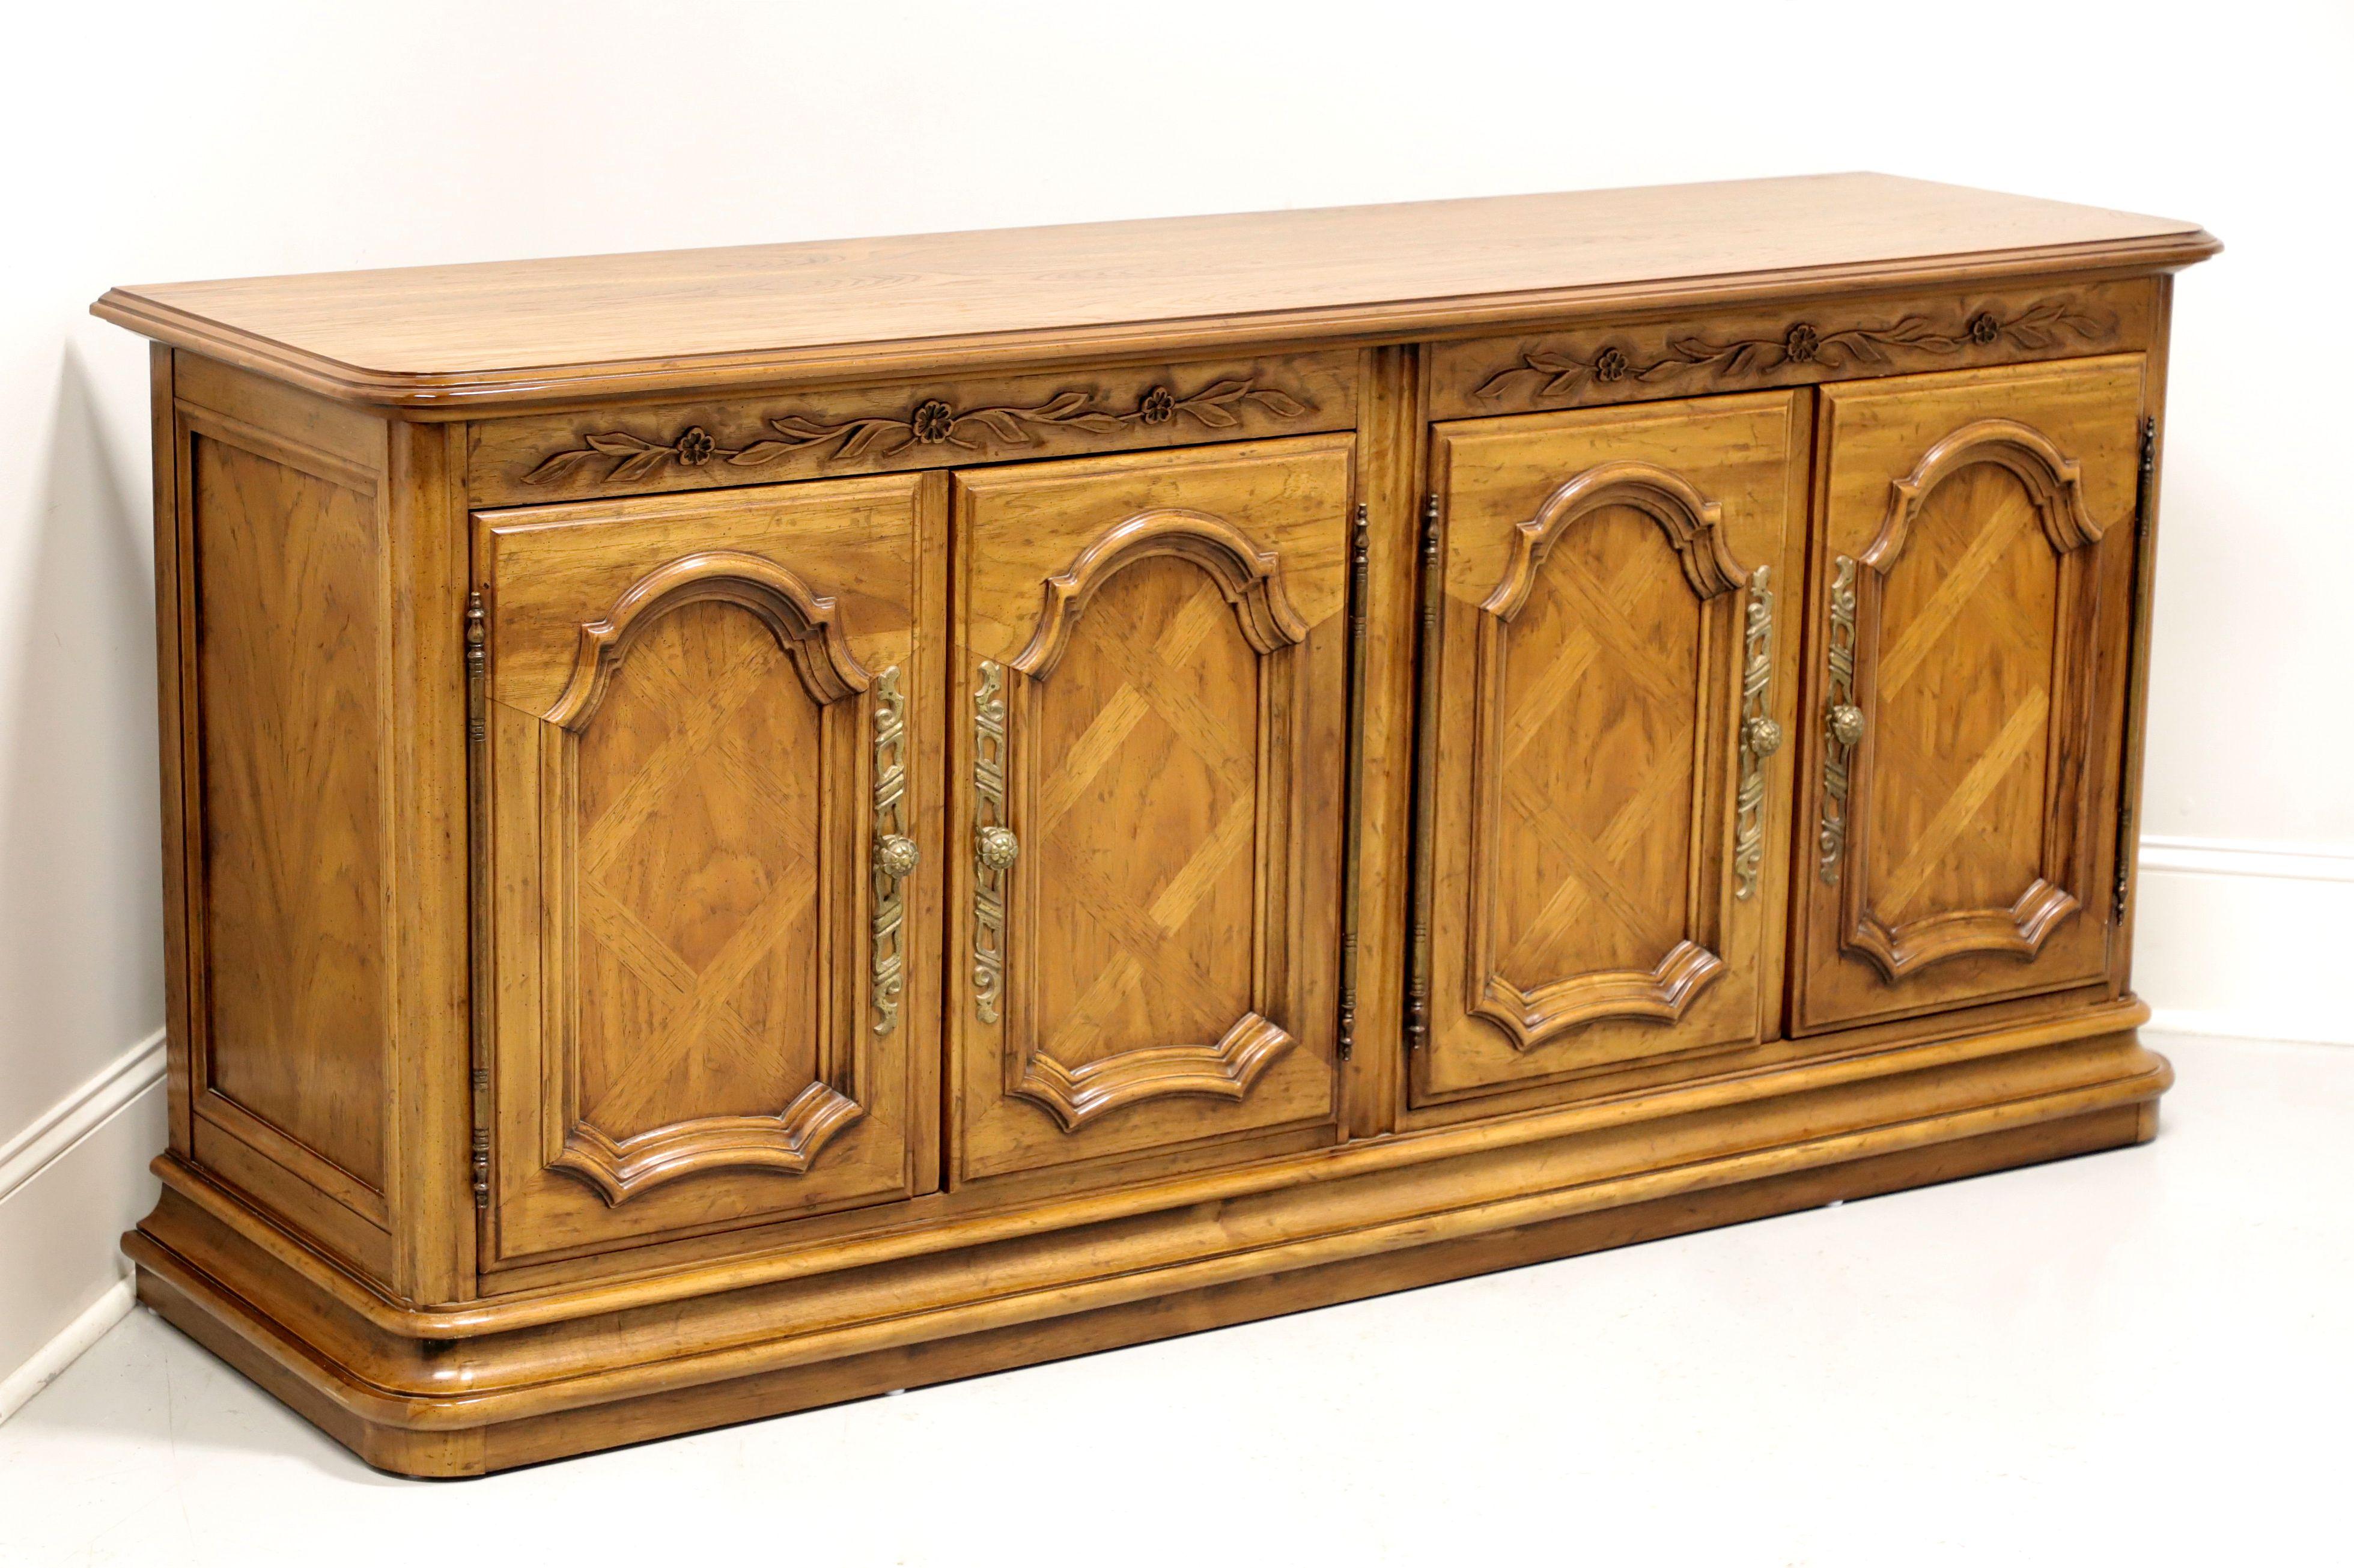 DREXEL Cabernet French Country Style Sideboard / Credenza 6